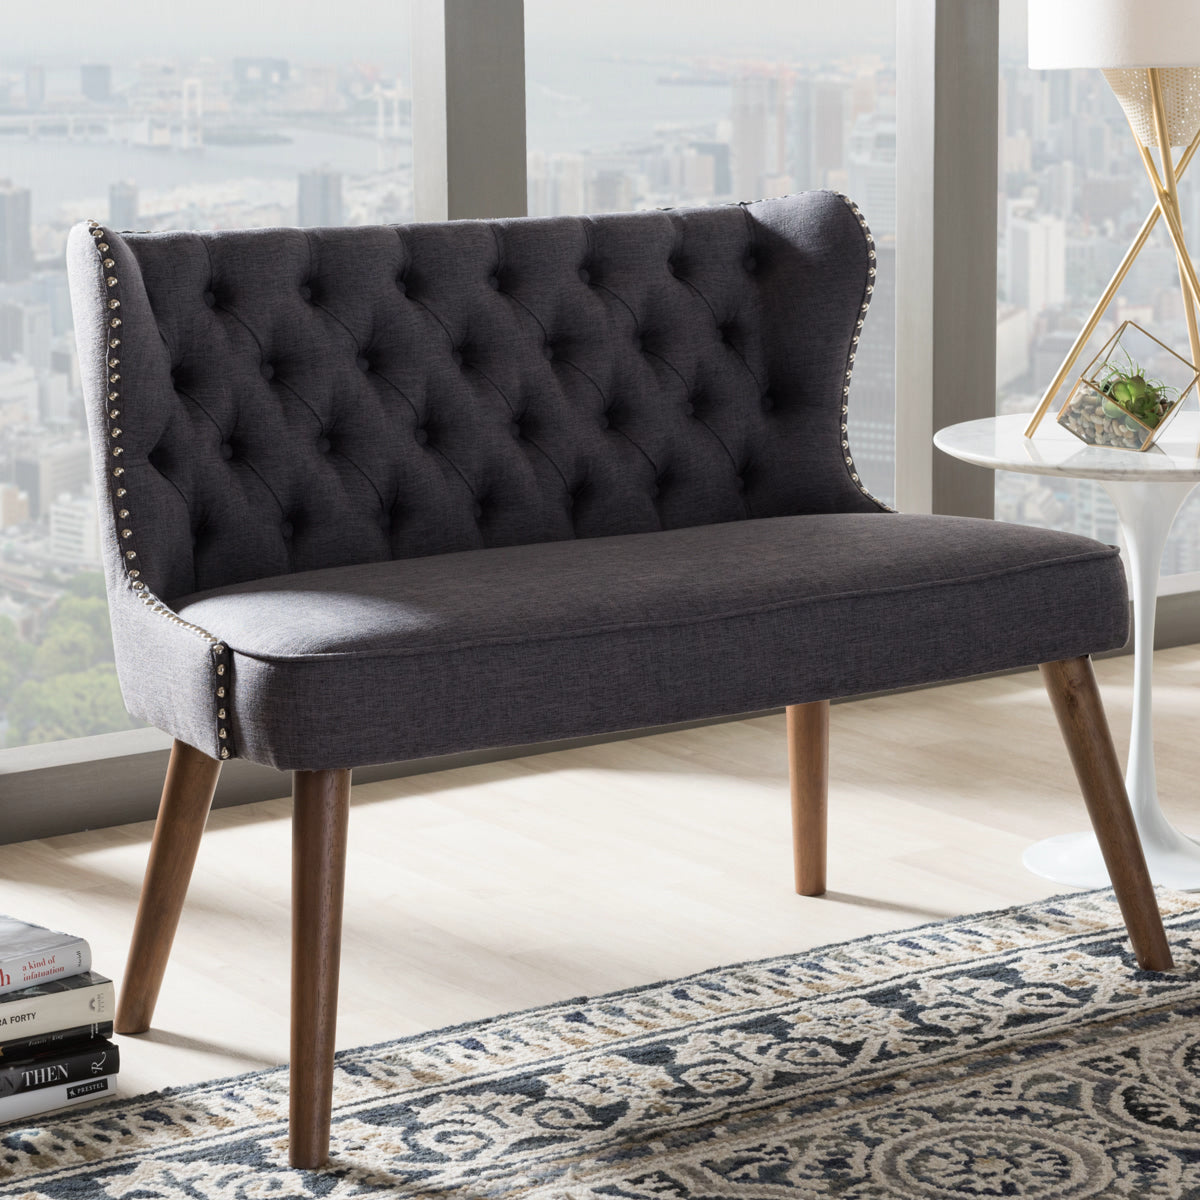 Baxton Studio Scarlett Mid-Century Modern Brown Wood and Dark Grey Fabric Upholstered Button-Tufting with Nail Heads Trim 2-Seater Loveseat Settee Baxton Studio-sofas-Minimal And Modern - 1